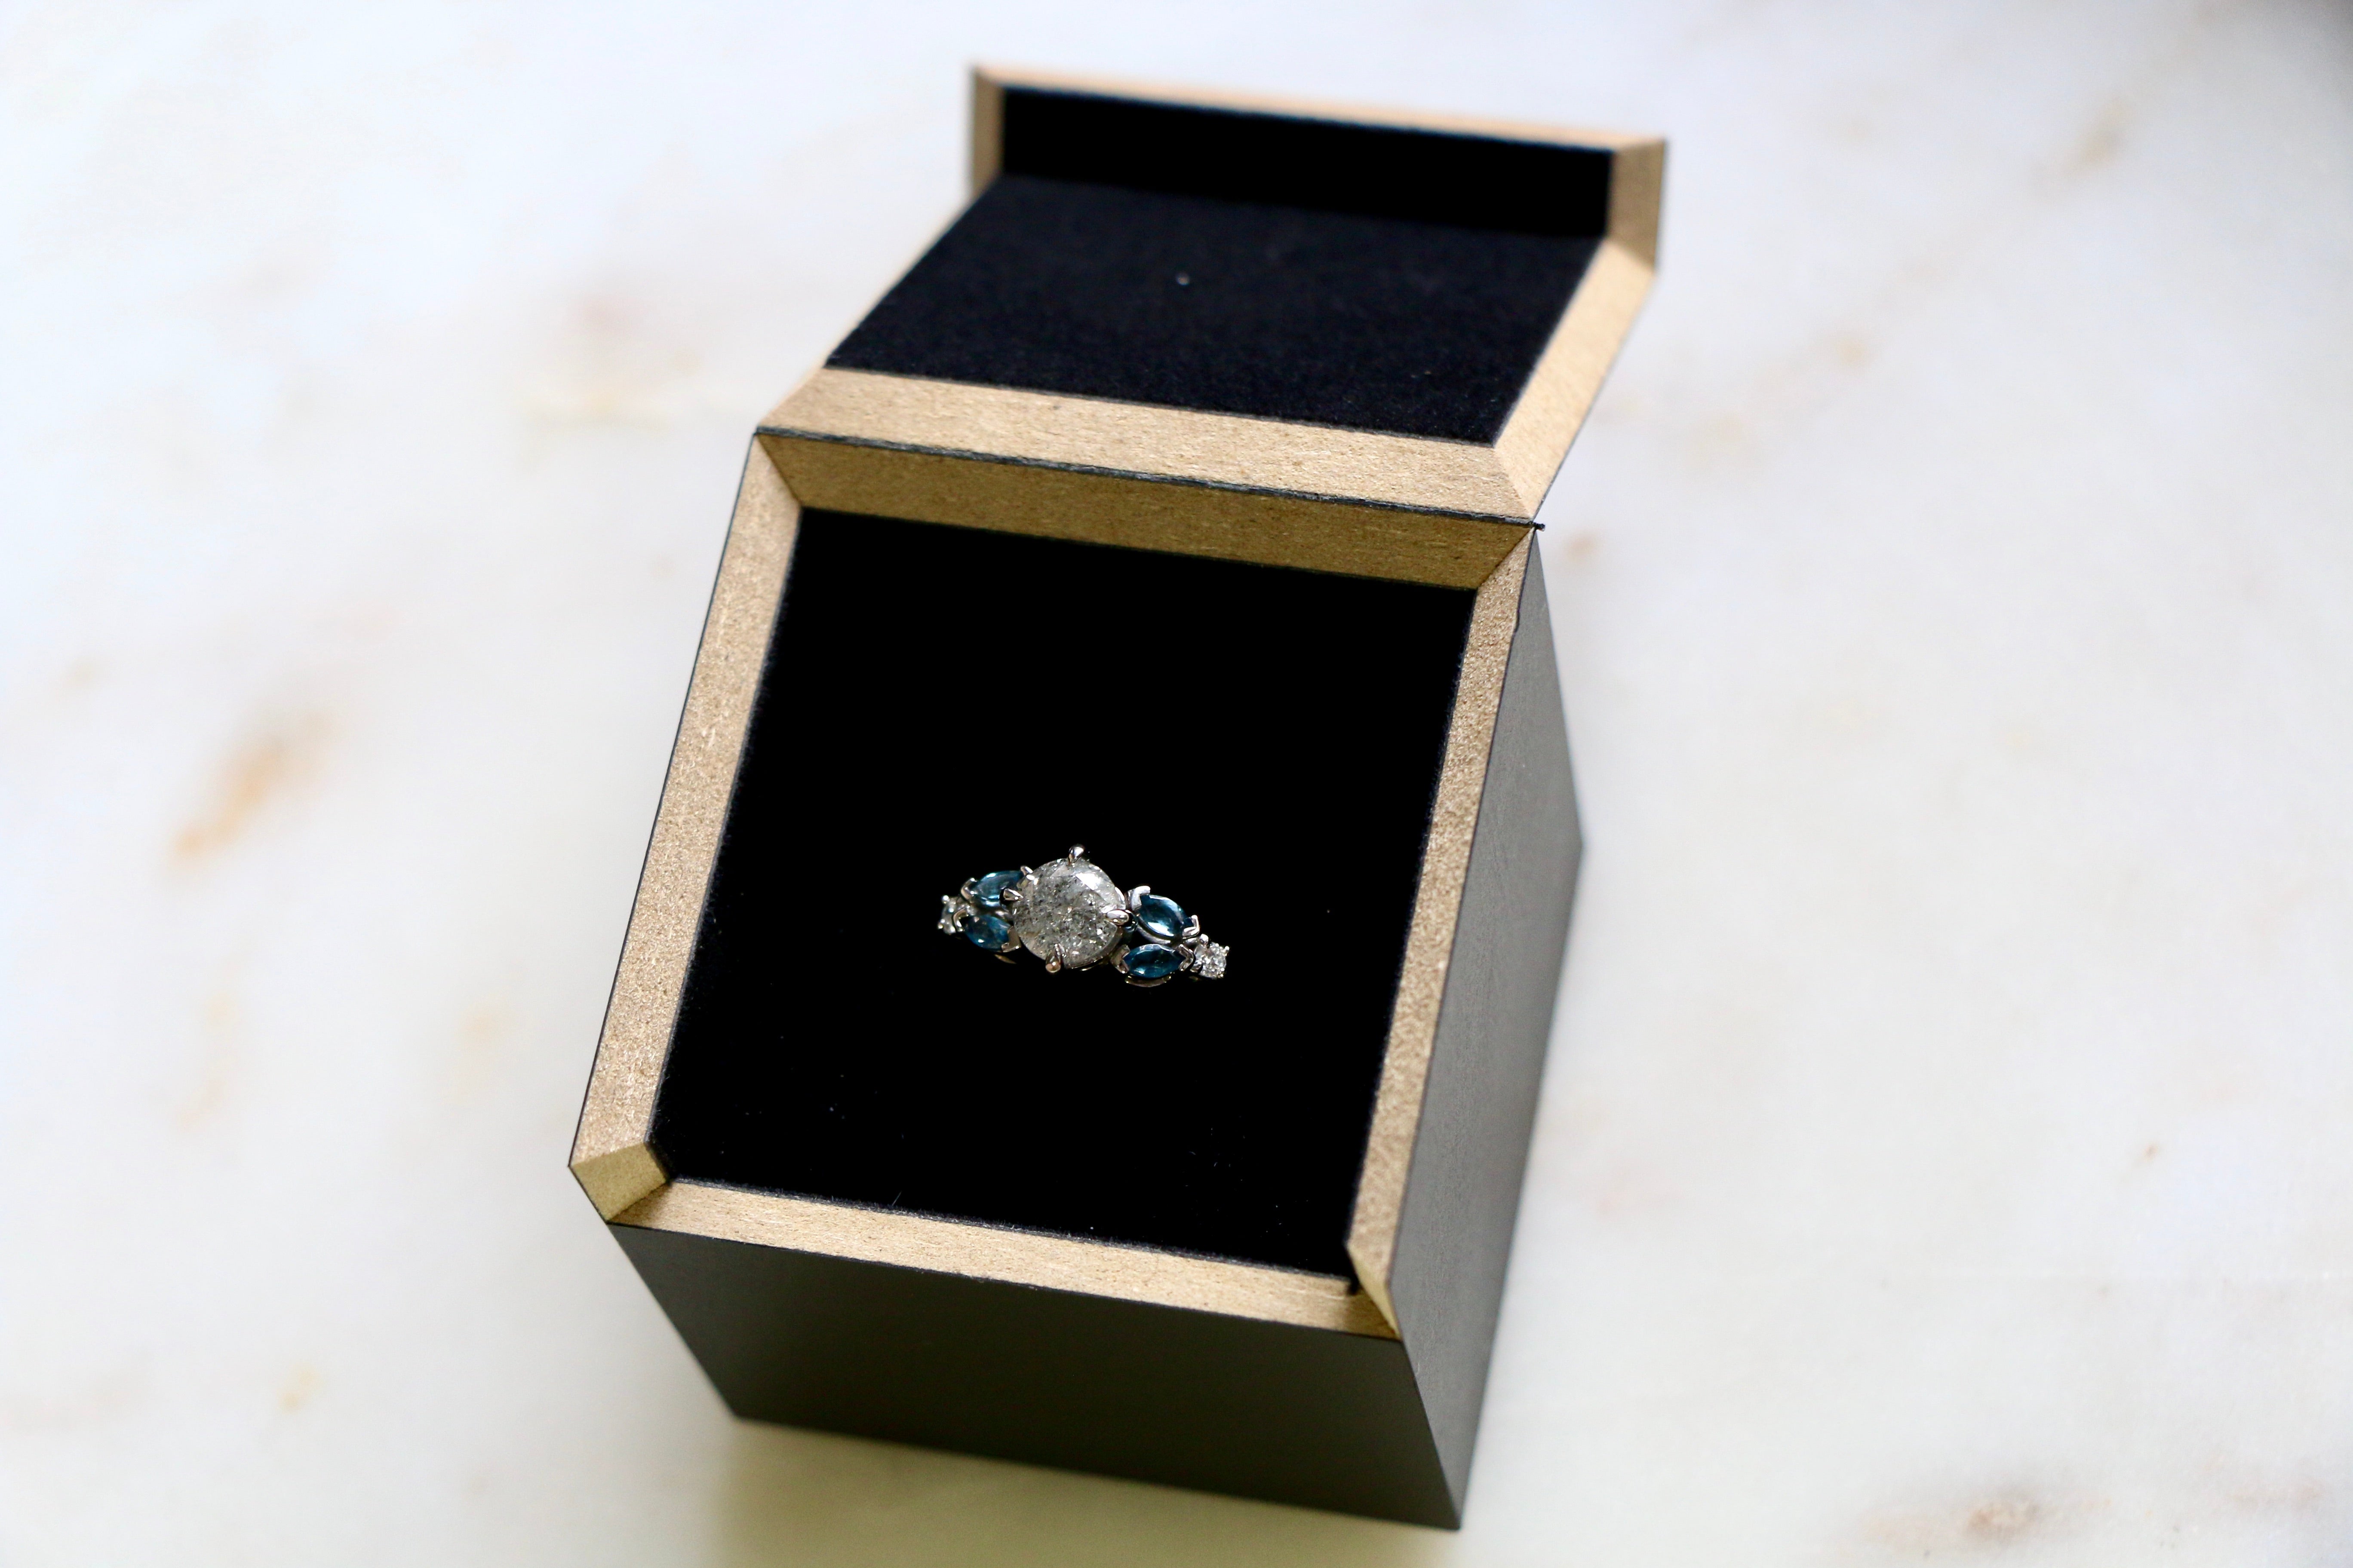 Salt and Pepper diamond engagement ring with flanking marquise topaz stones set in white gold. In it's presentation box on a marble surface.